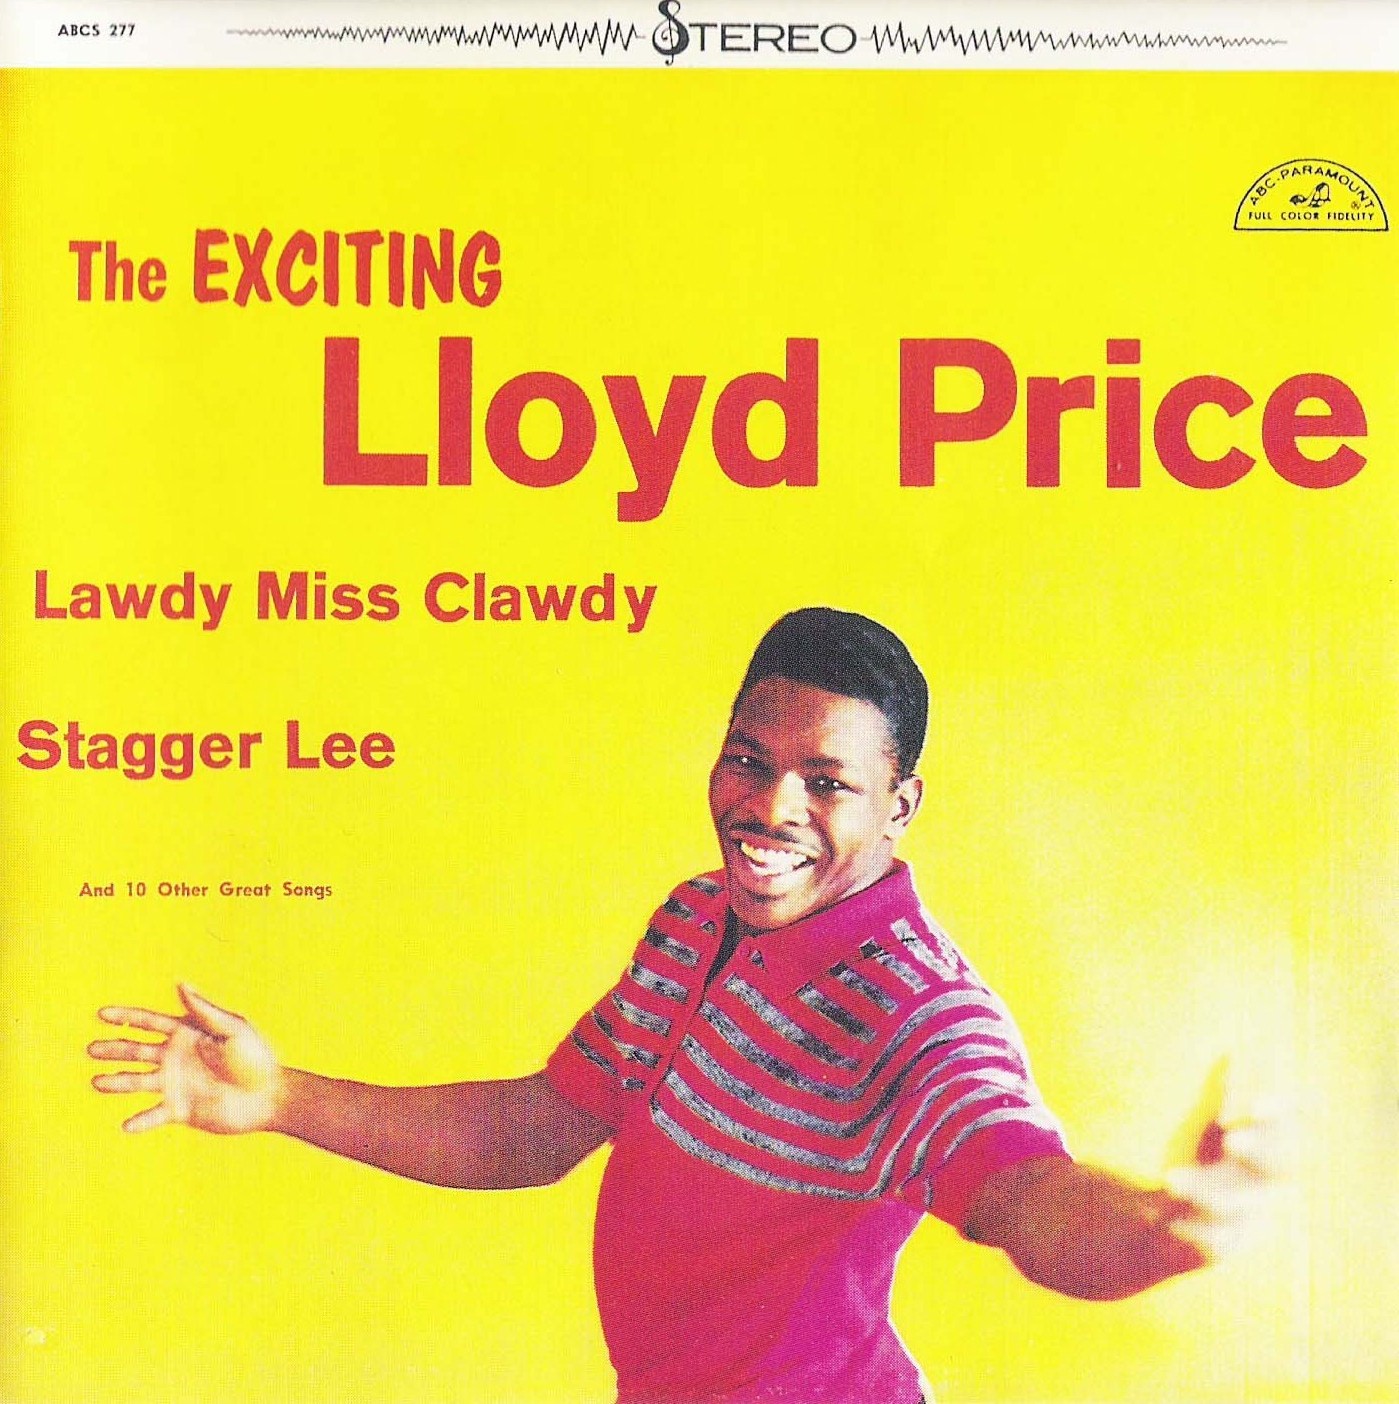 The Vintage Machine Lloyd Price The Exciting (1959)